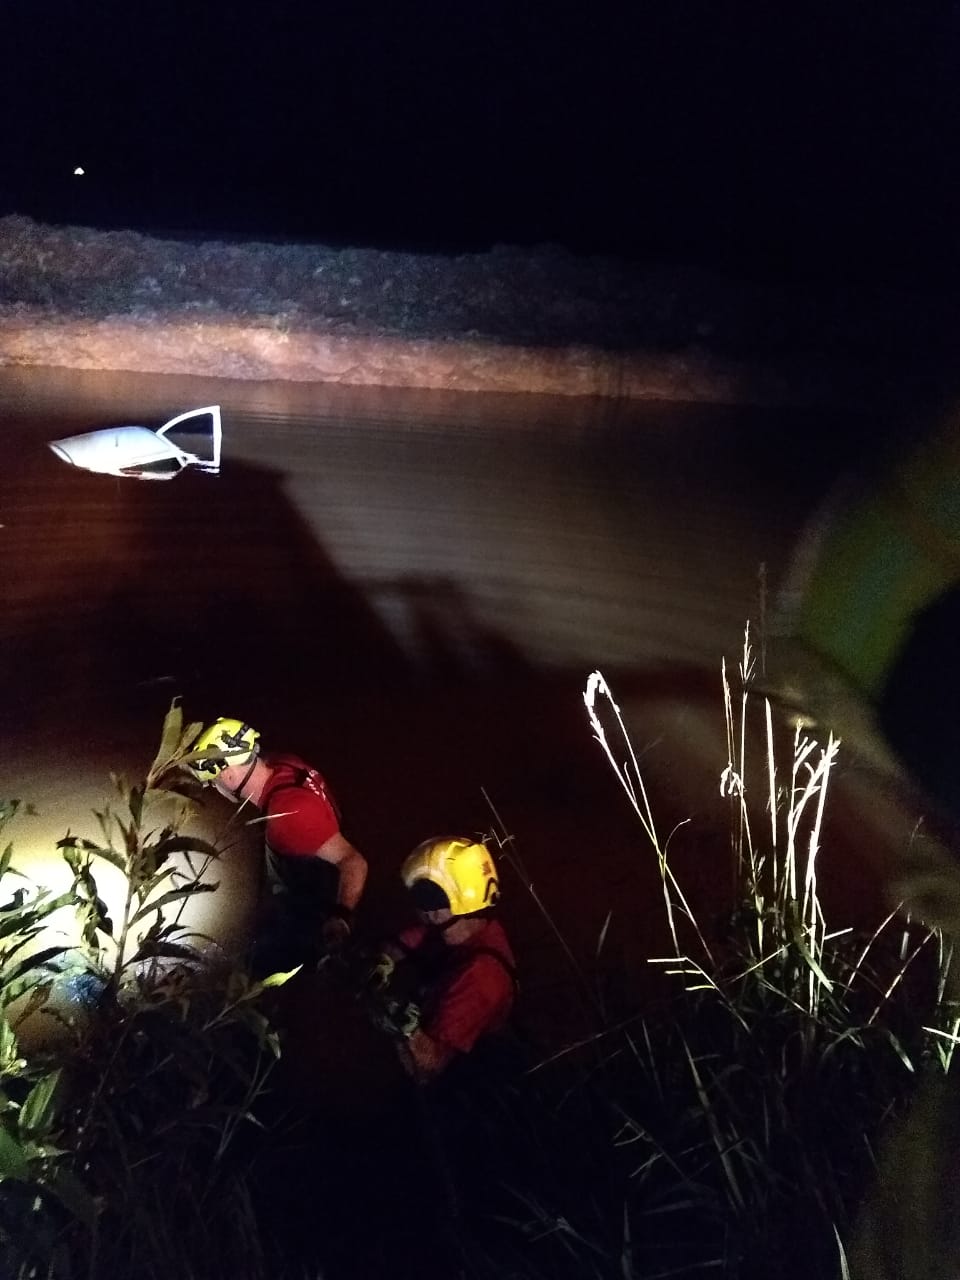 The vehicle went off the road and fell into a flooded area next to the road, submerging under water up to the ceiling.  - Military Fire Department/Reproduction/ND